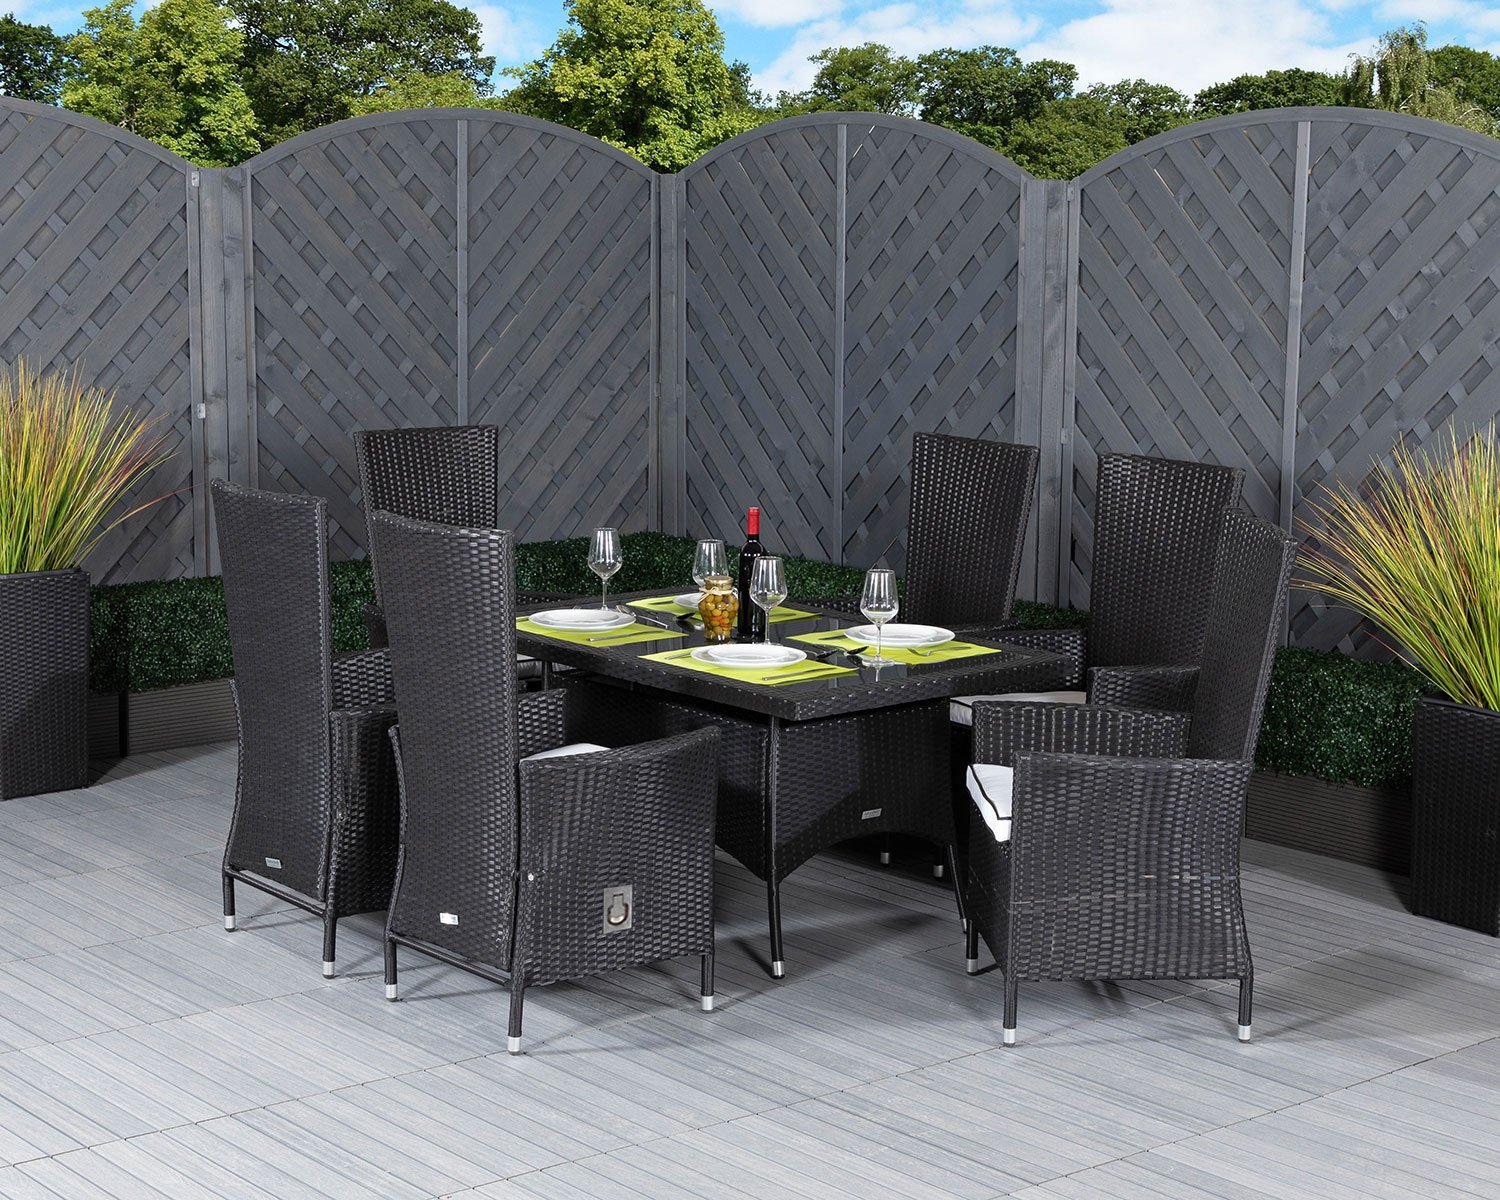 Small Rectangular Rattan Garden Dining Table Amp 6 Reclining Chairs In Black Amp White Cambridge Rattan Direct